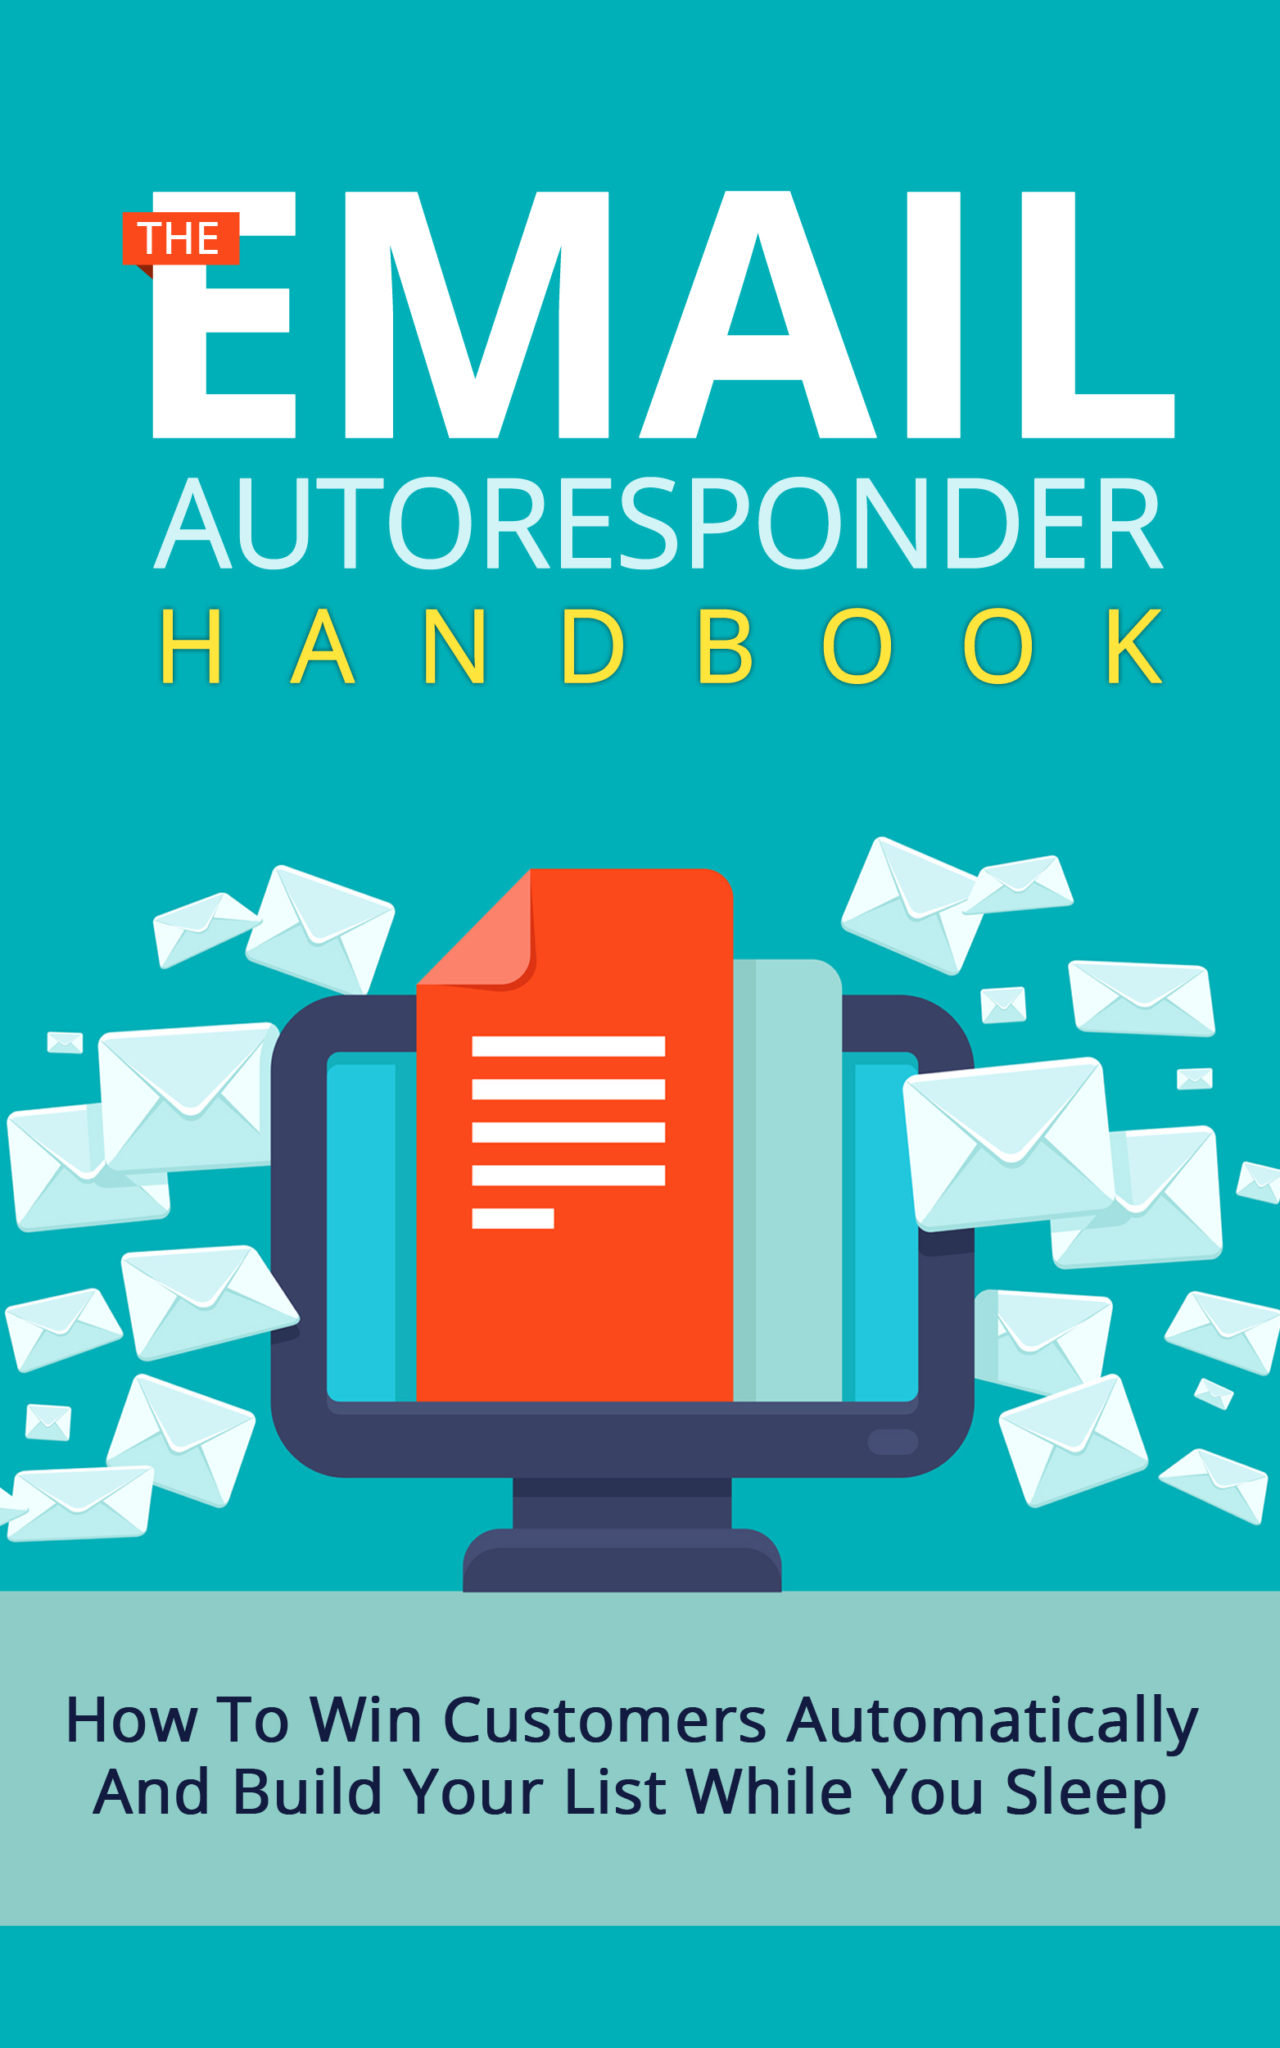 FREE: The Email Autoresponder Handbook: How To Win Customers Automatically And Build Your List While You Sleep by Evan Silva